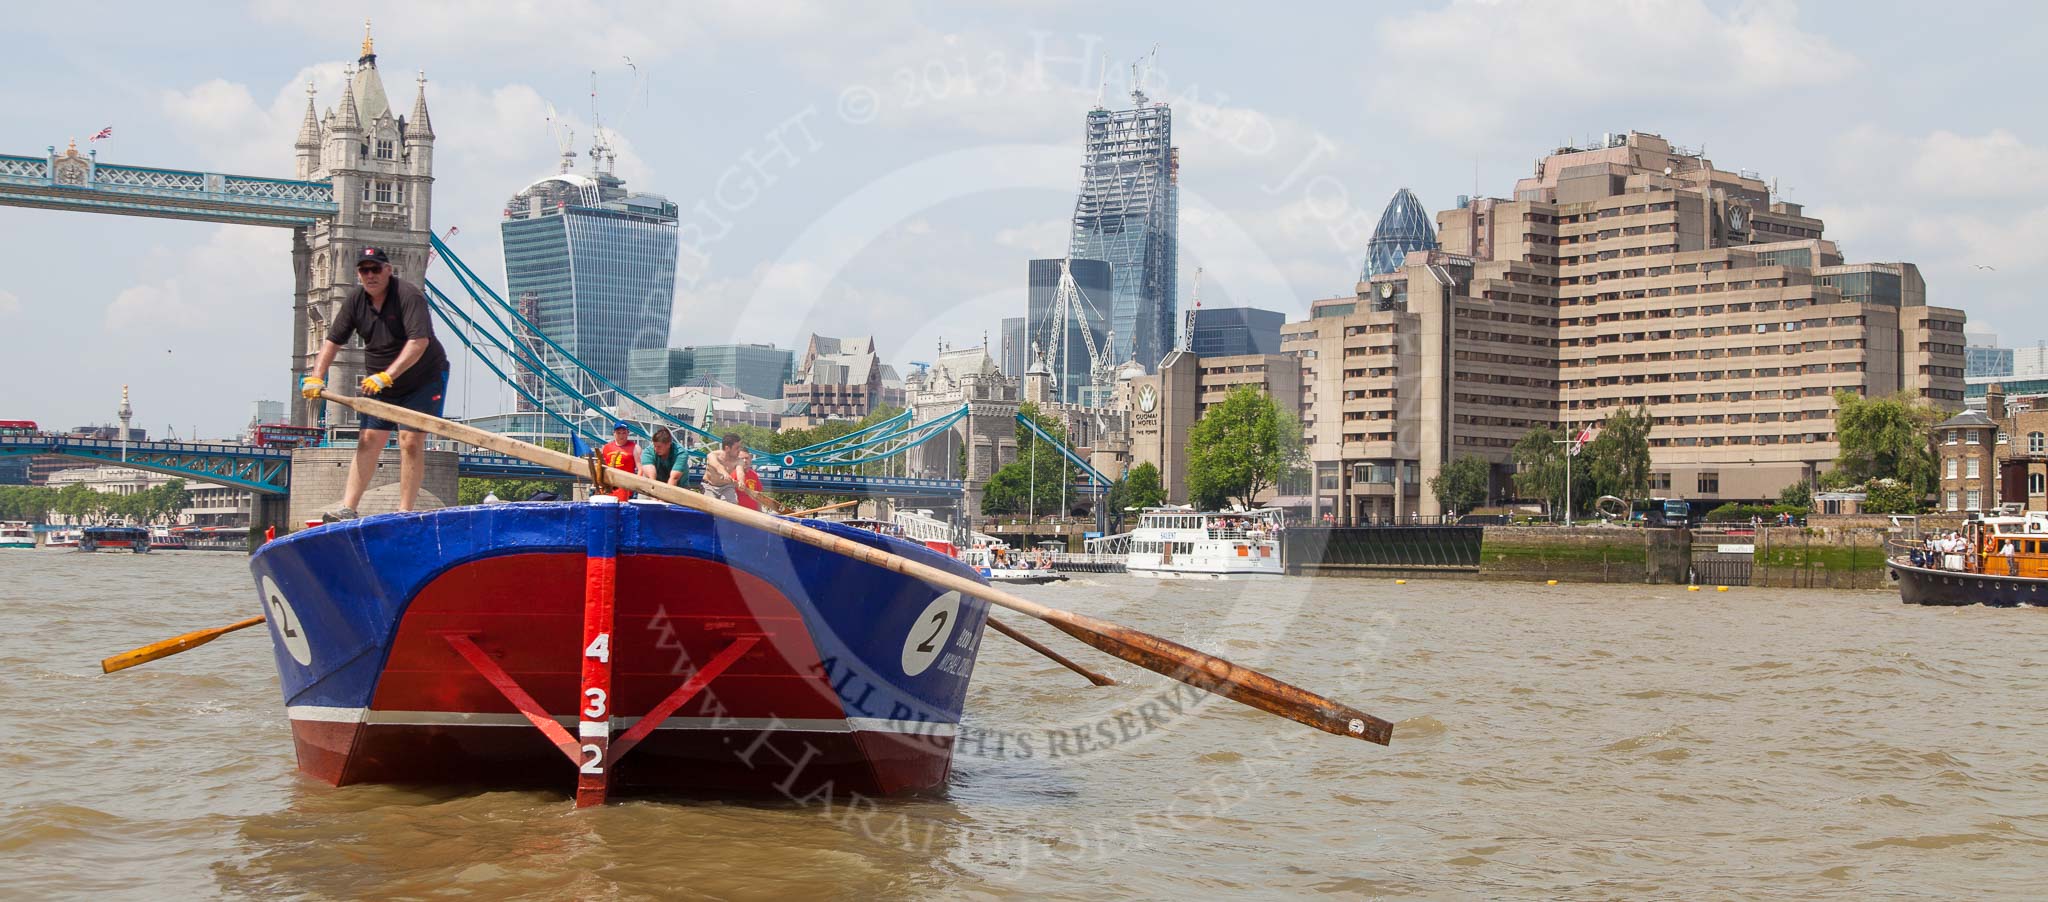 TOW River Thames Barge Driving Race 2013: Barge "Steve Faldo" by Capital Pleasure Boats, approaching Tower Bridge..
River Thames between Greenwich and Westminster,
London,

United Kingdom,
on 13 July 2013 at 13:38, image #372